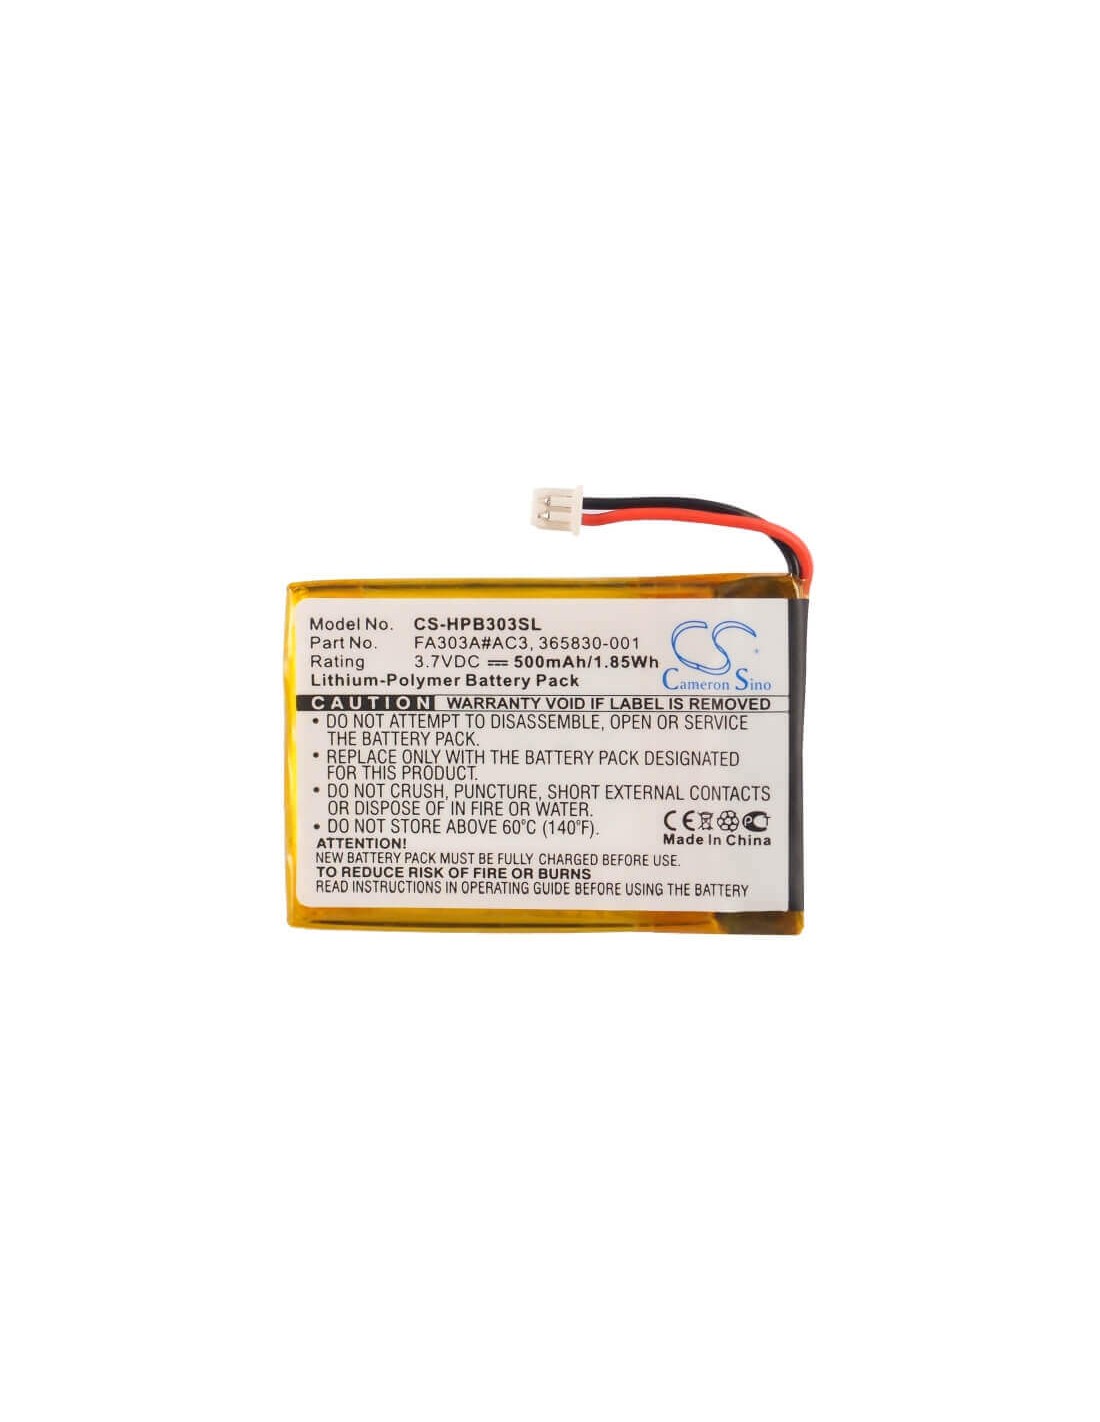 Battery for Hp Bluetooth Stereo Headphones 3.7V, 500mAh - 1.85Wh